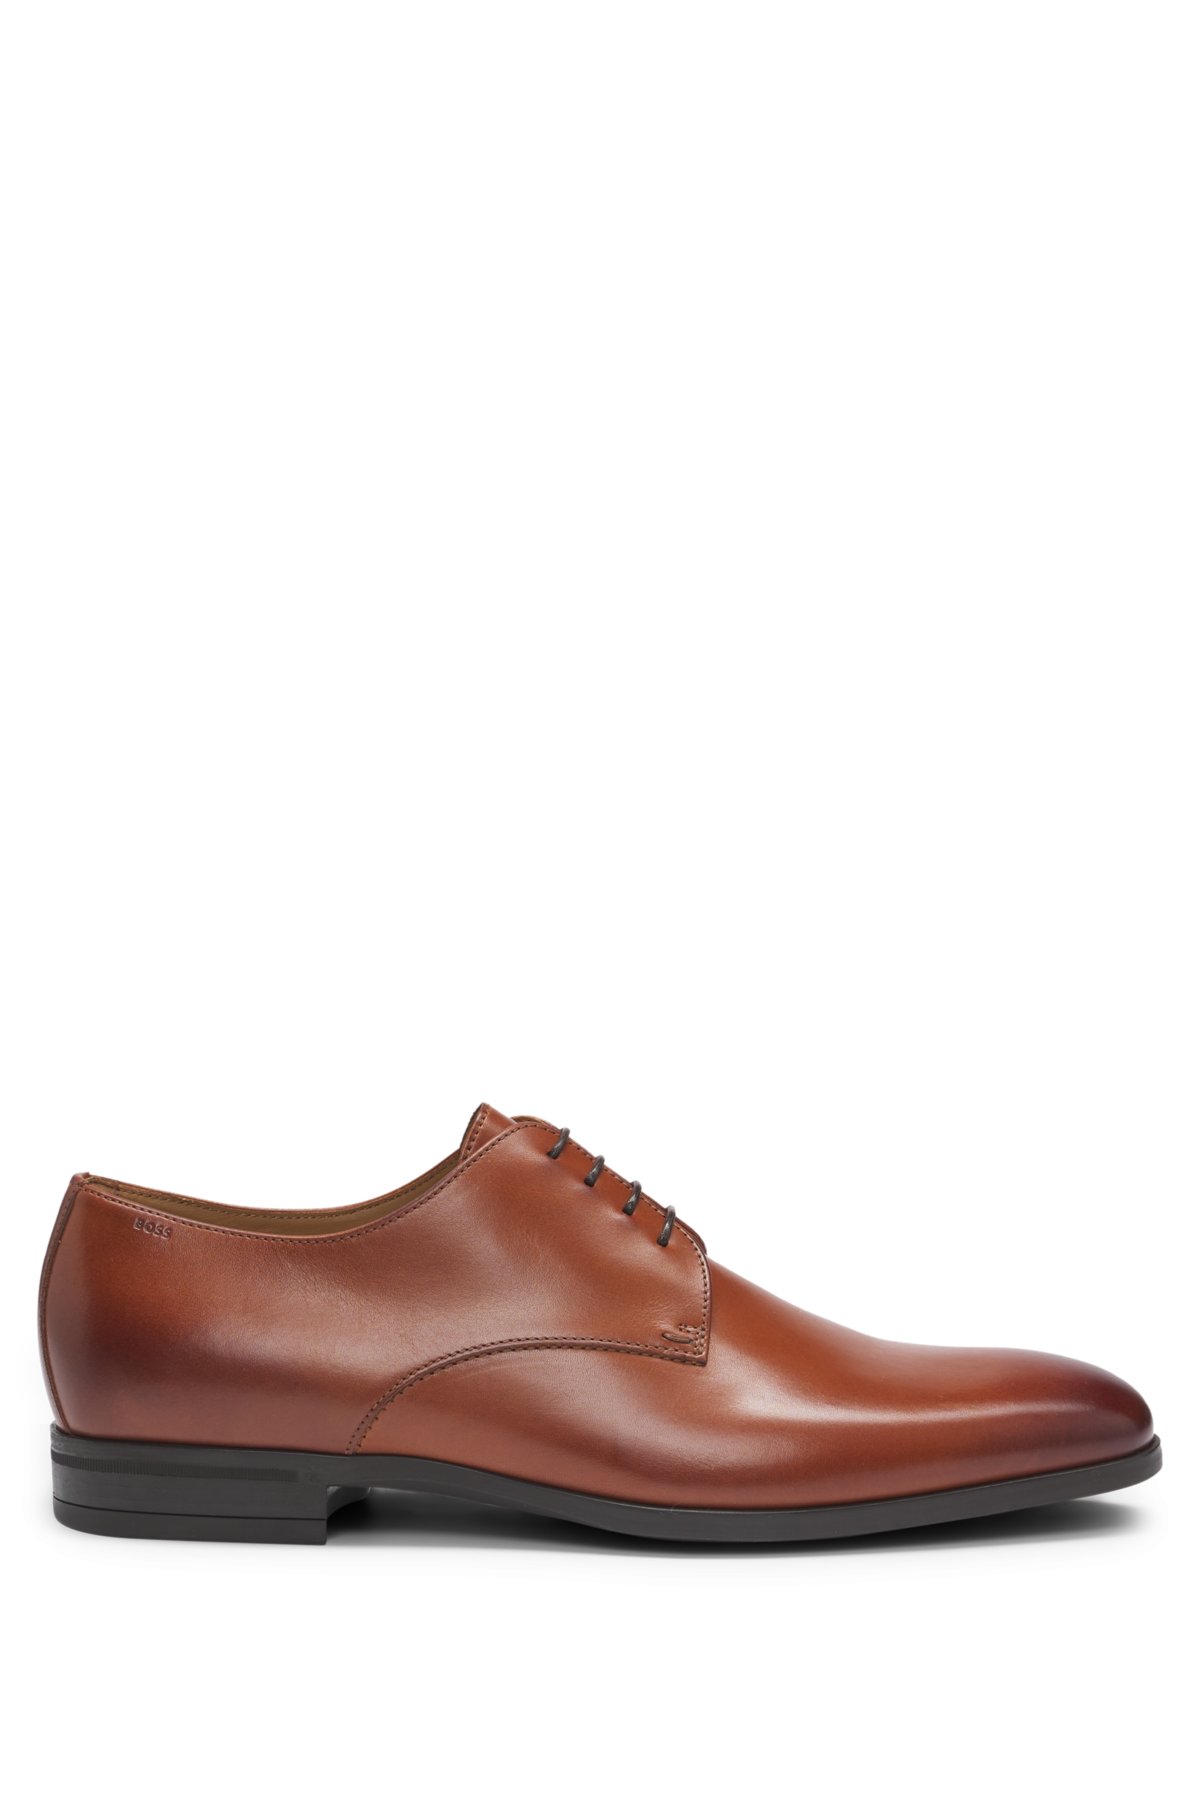 BOSS - Leather Derby shoes with rubber sole